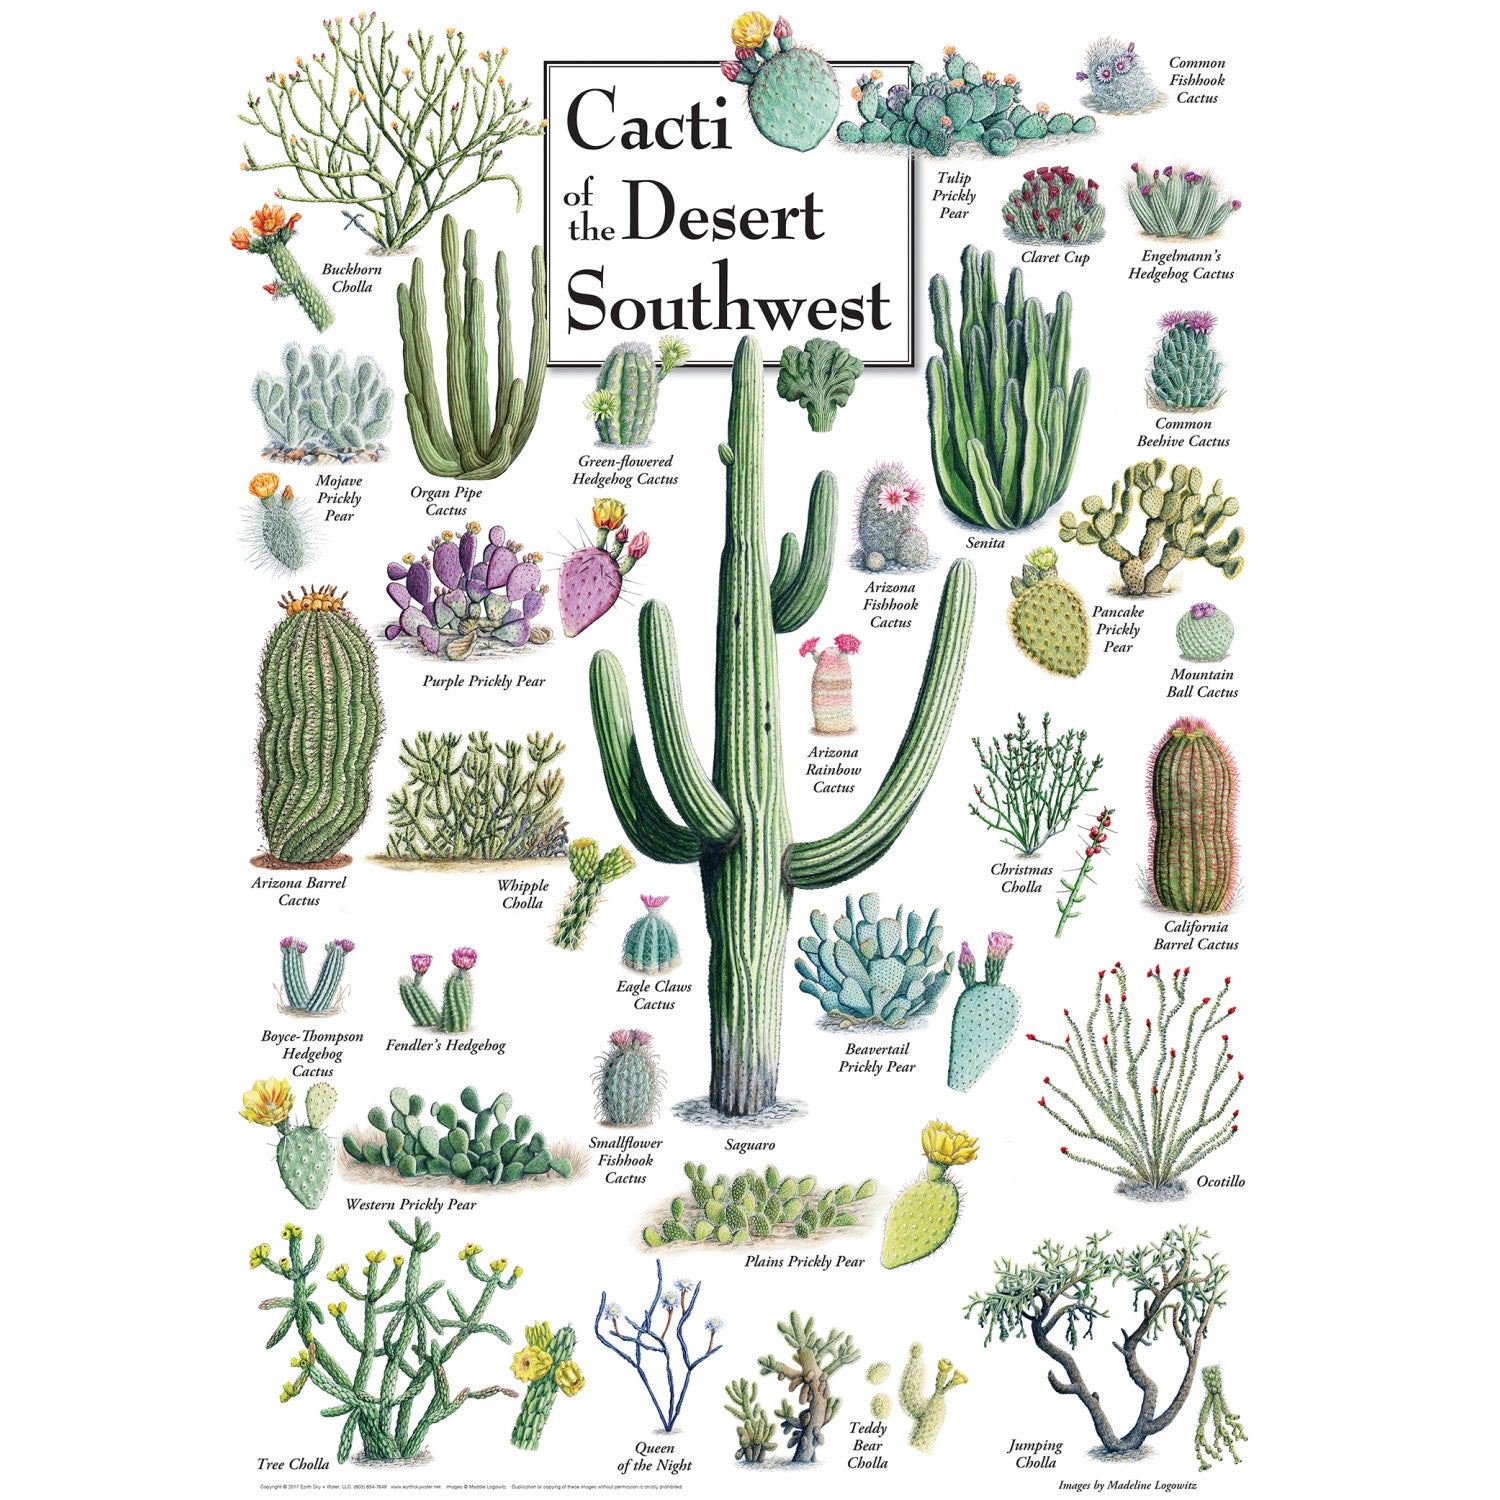 Field Guide - Cacti of the Desert Southwest 1000 Piece Puzzle